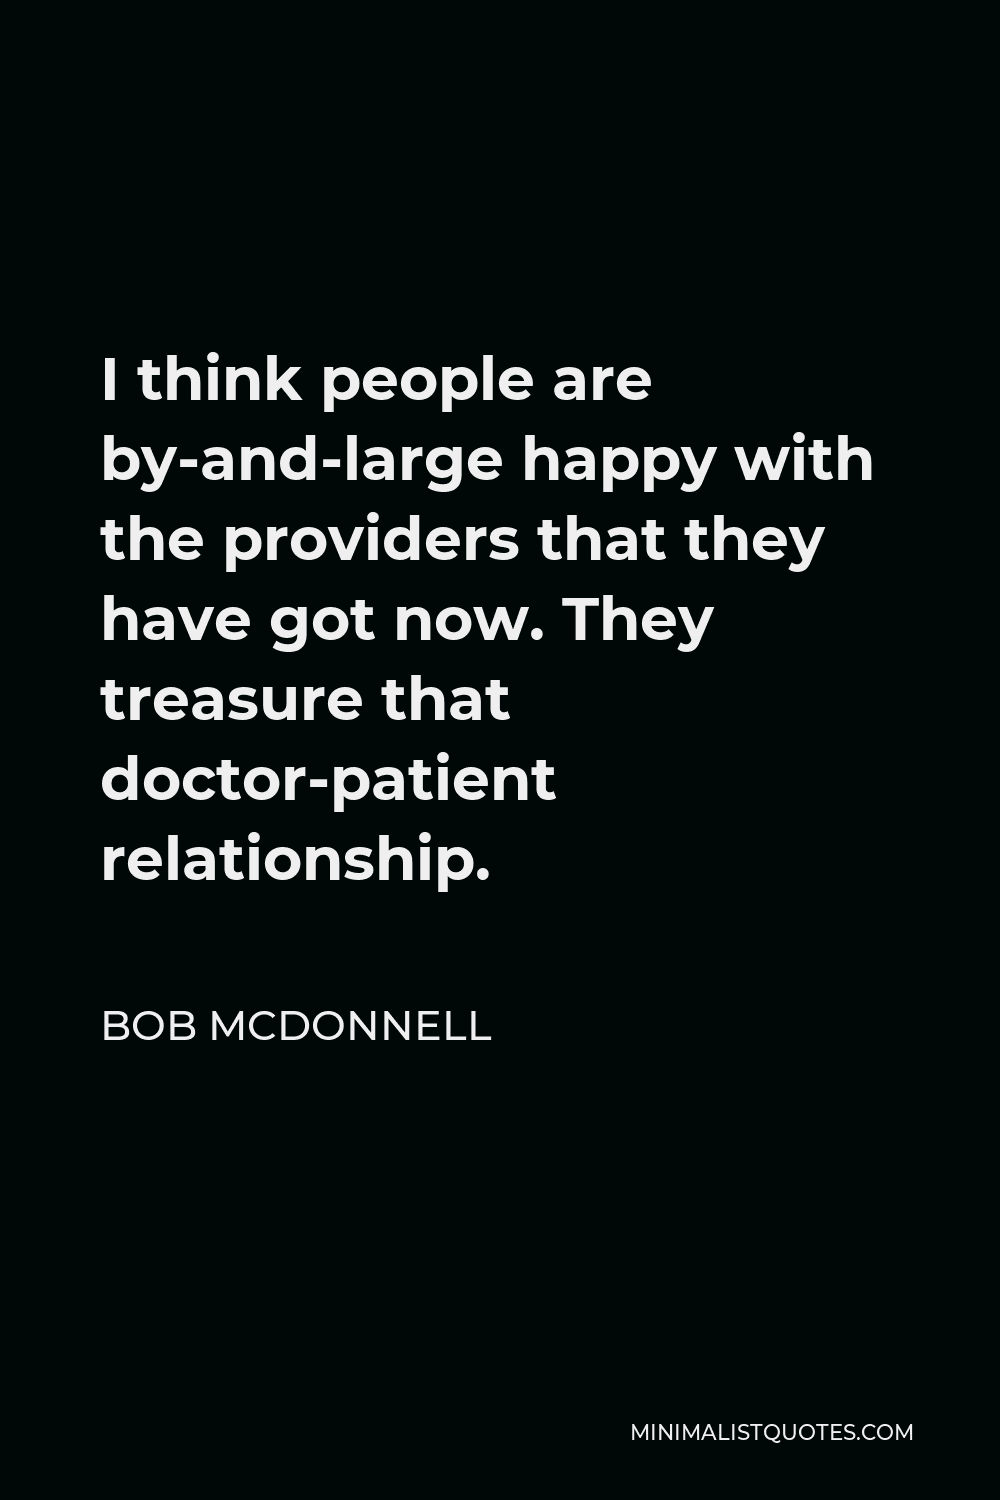 Bob McDonnell Quote - I think people are by-and-large happy with the providers that they have got now. They treasure that doctor-patient relationship.